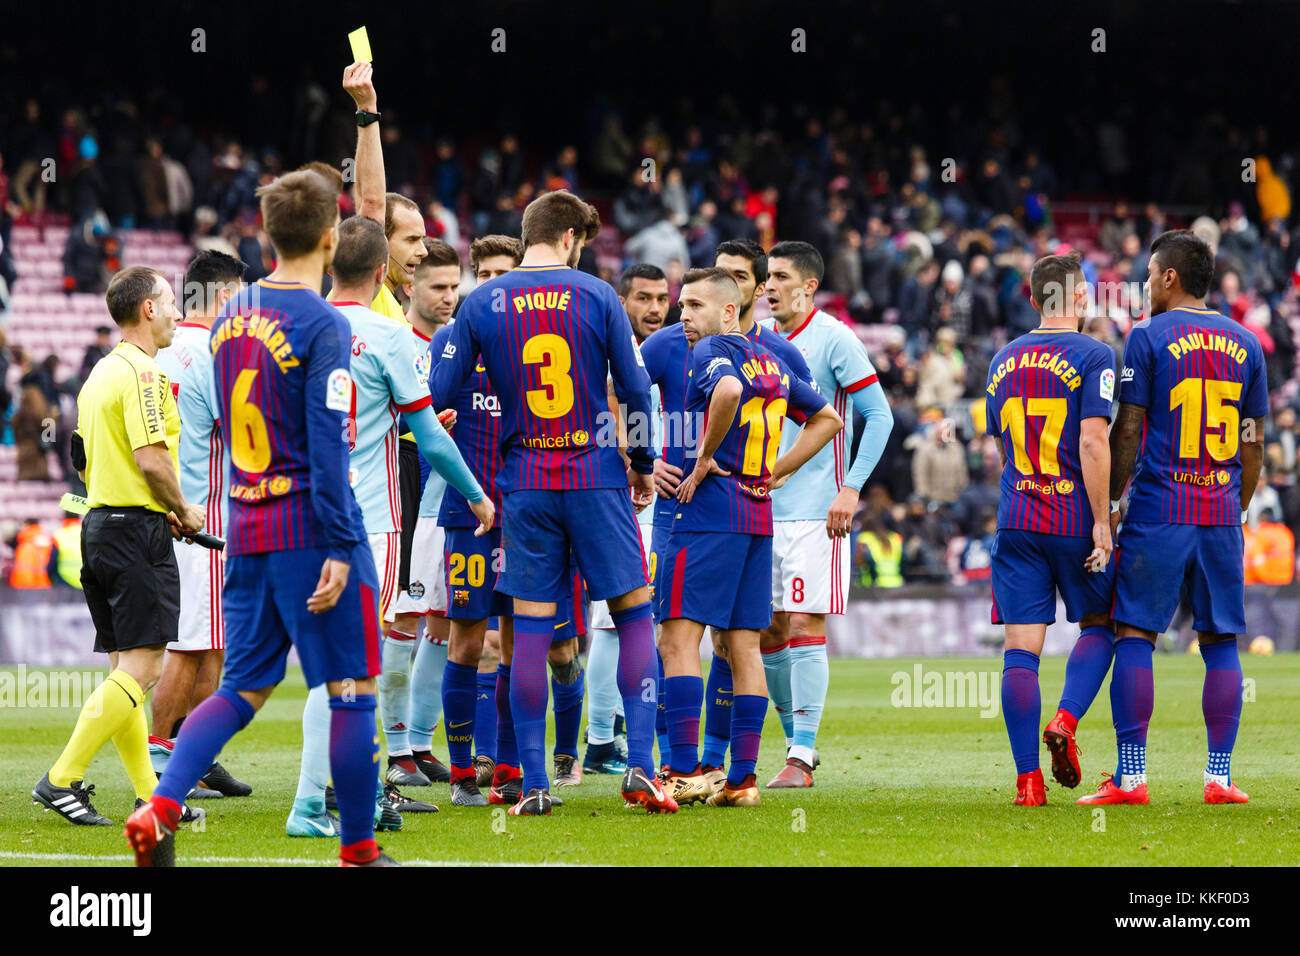 Barcelona, Spain. 02nd Dec, 2017. FC Barcelona players at the end of the match of the La Liga between FC Barcelona and RC Celta at Camp Nou. The match ended in a draw 2-2. Credit: Joan Gosa Badia/Alamy Live News Stock Photo